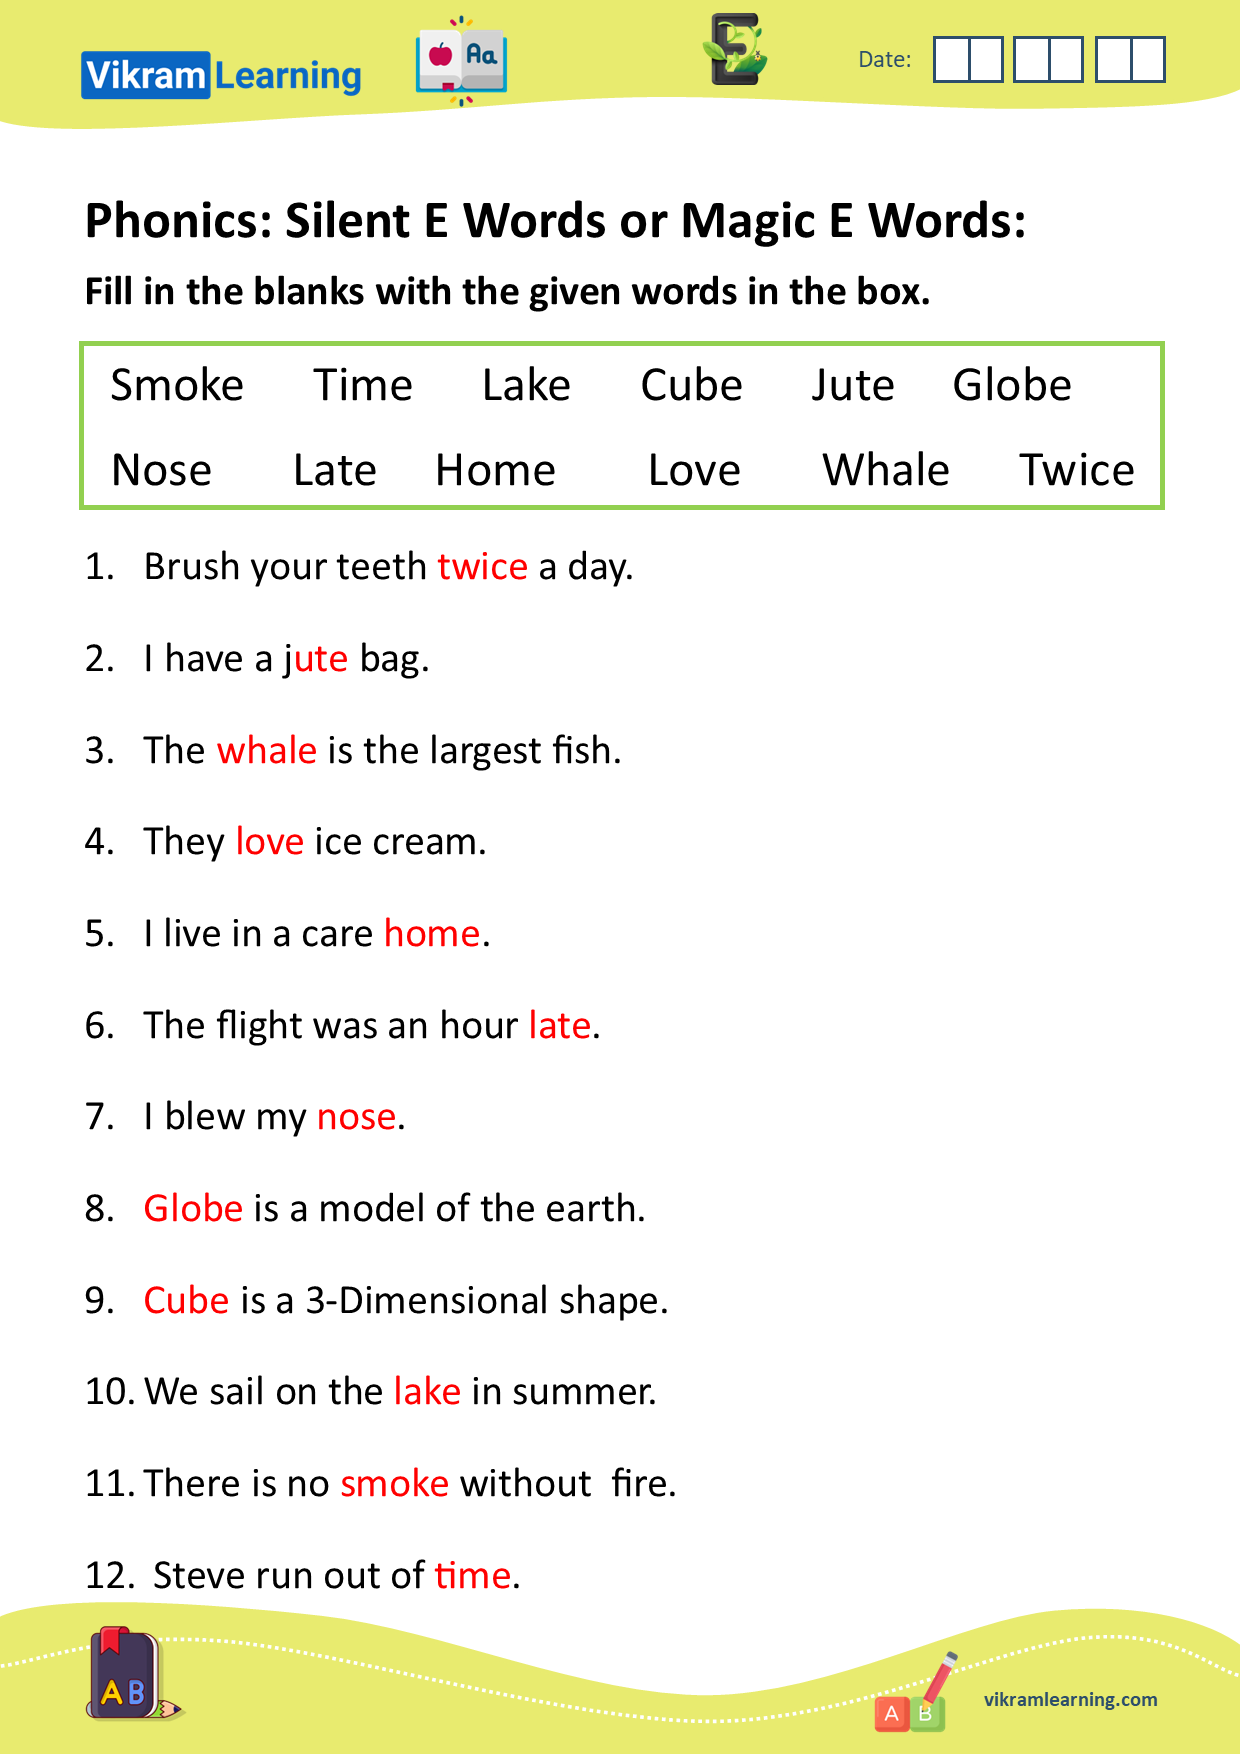 Download phonics silent e words or magic e words worksheets